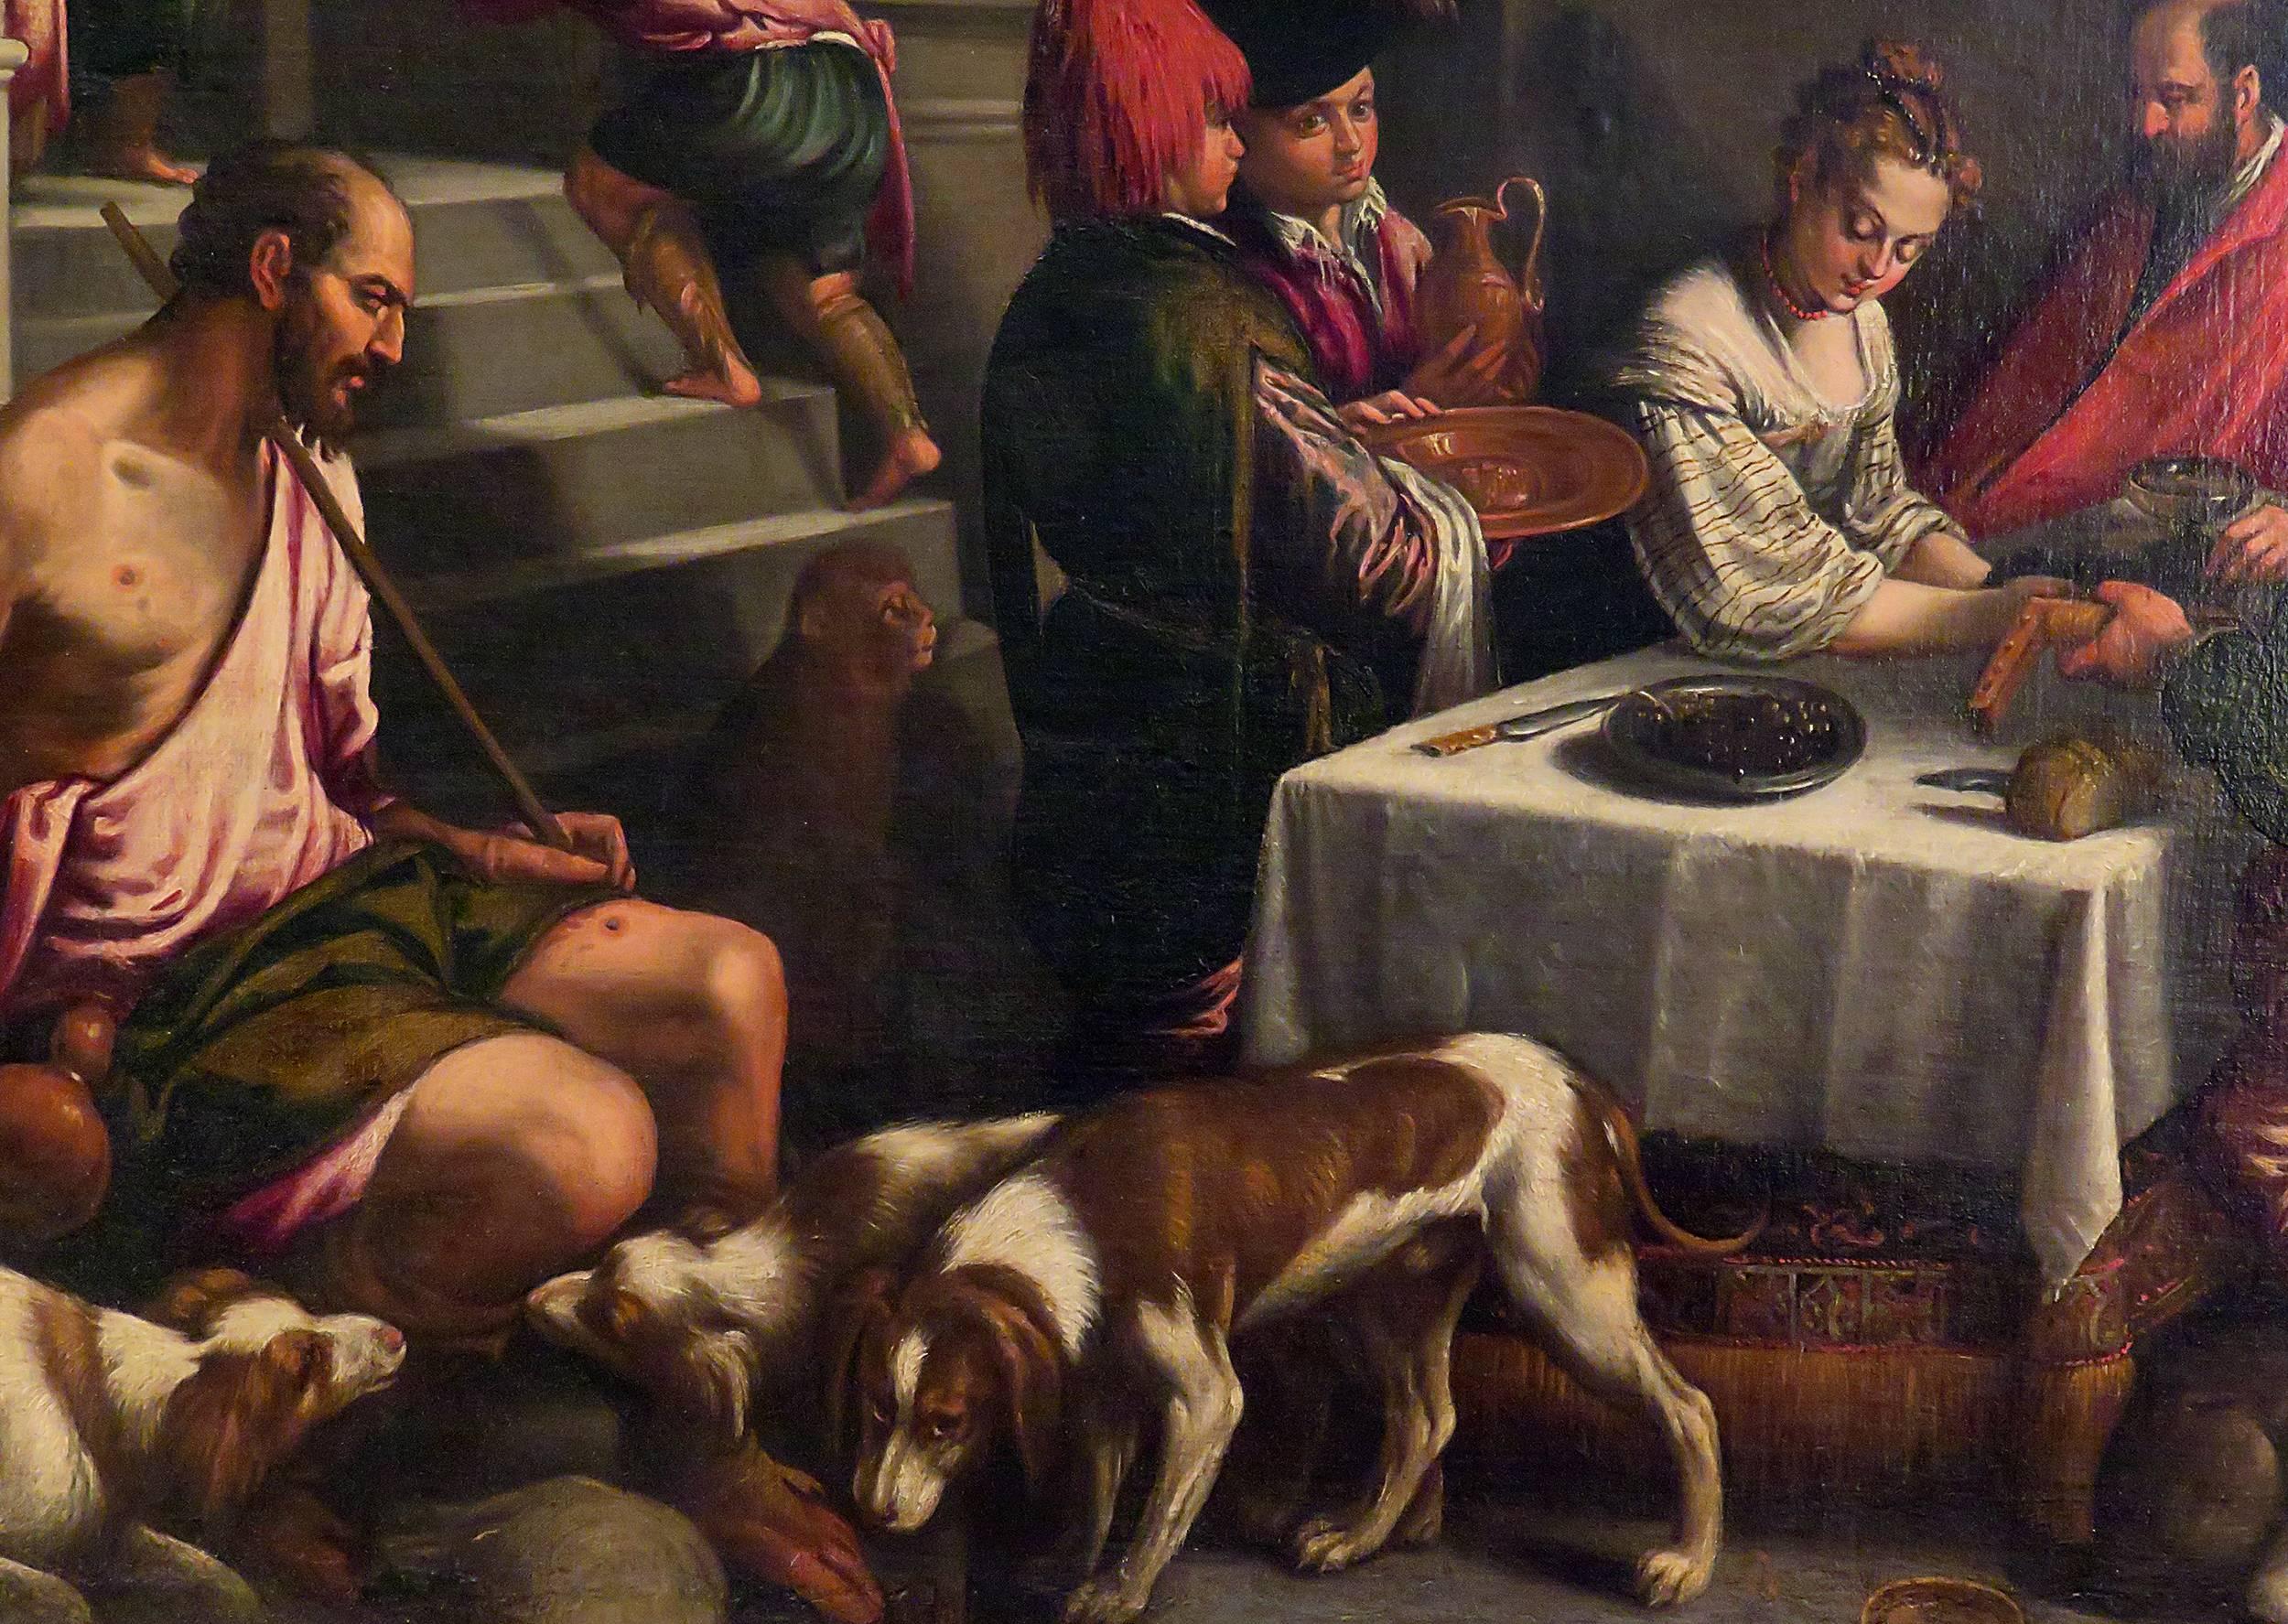 A large and decorative painting of Saint Rocco at a feast. Attributed to Jacopo Bassano part of a family of noted Venetian painters active in the 16th and 17th century. The family workshop produced a large body of works featuring religious subjects